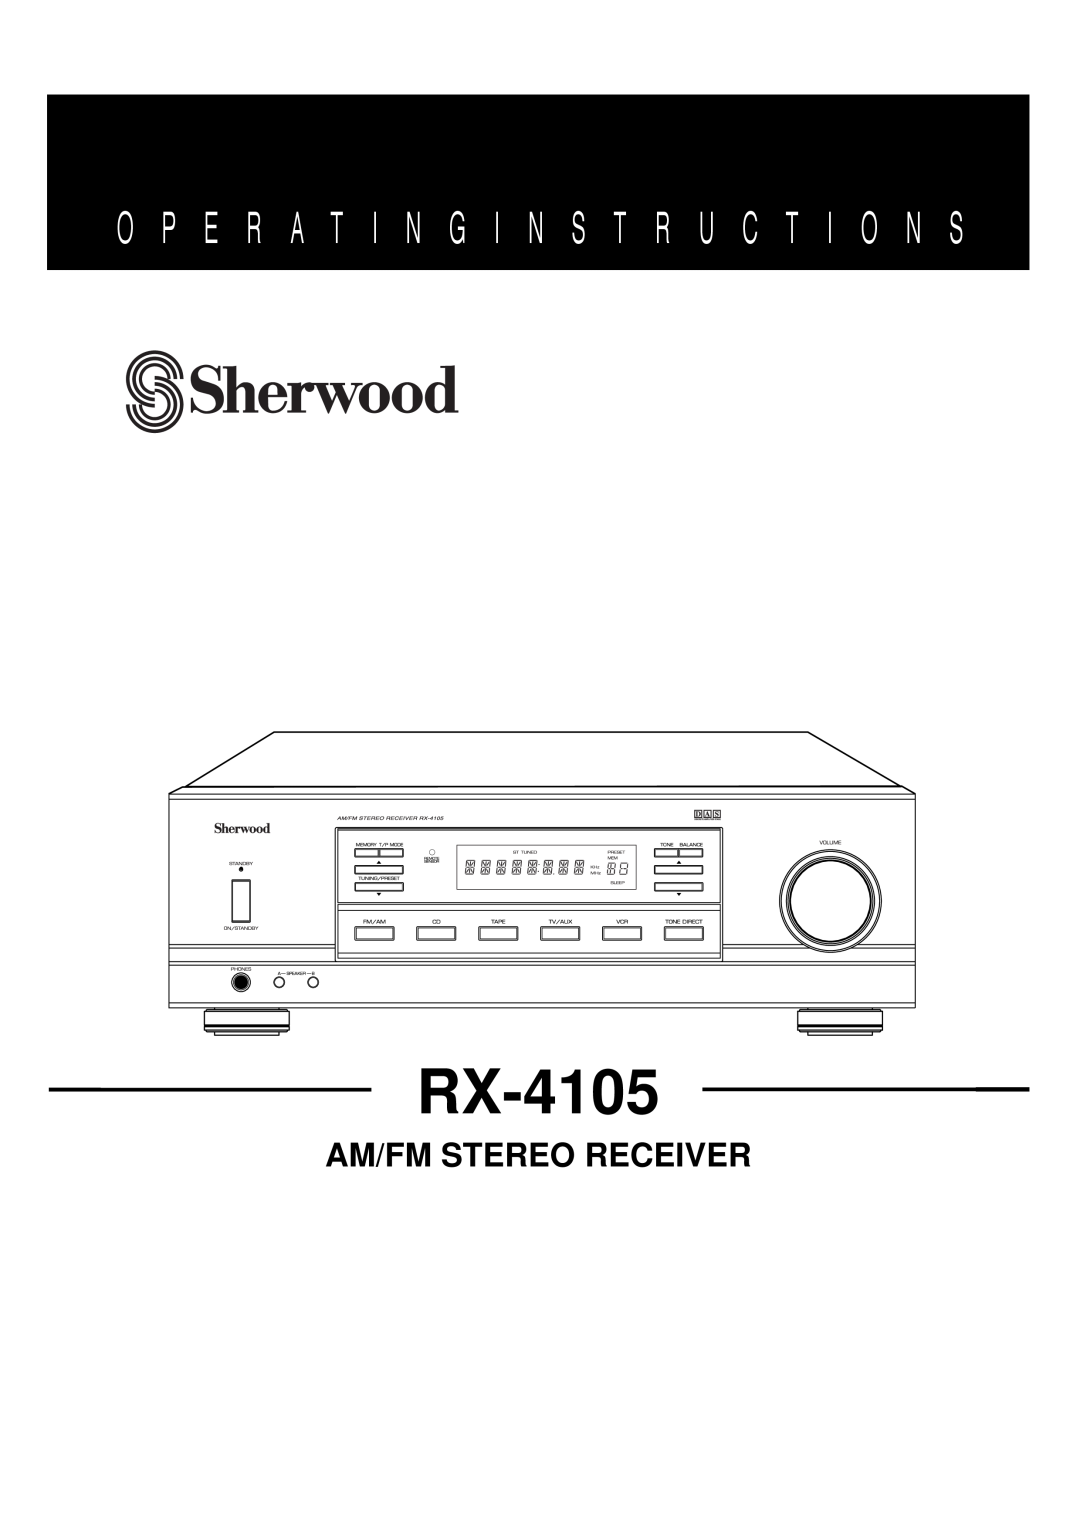 Sherwood RX-4105 manual O P E R A T I N G I N S T R U C T I O N S, Am/Fm Stereo Receiver 